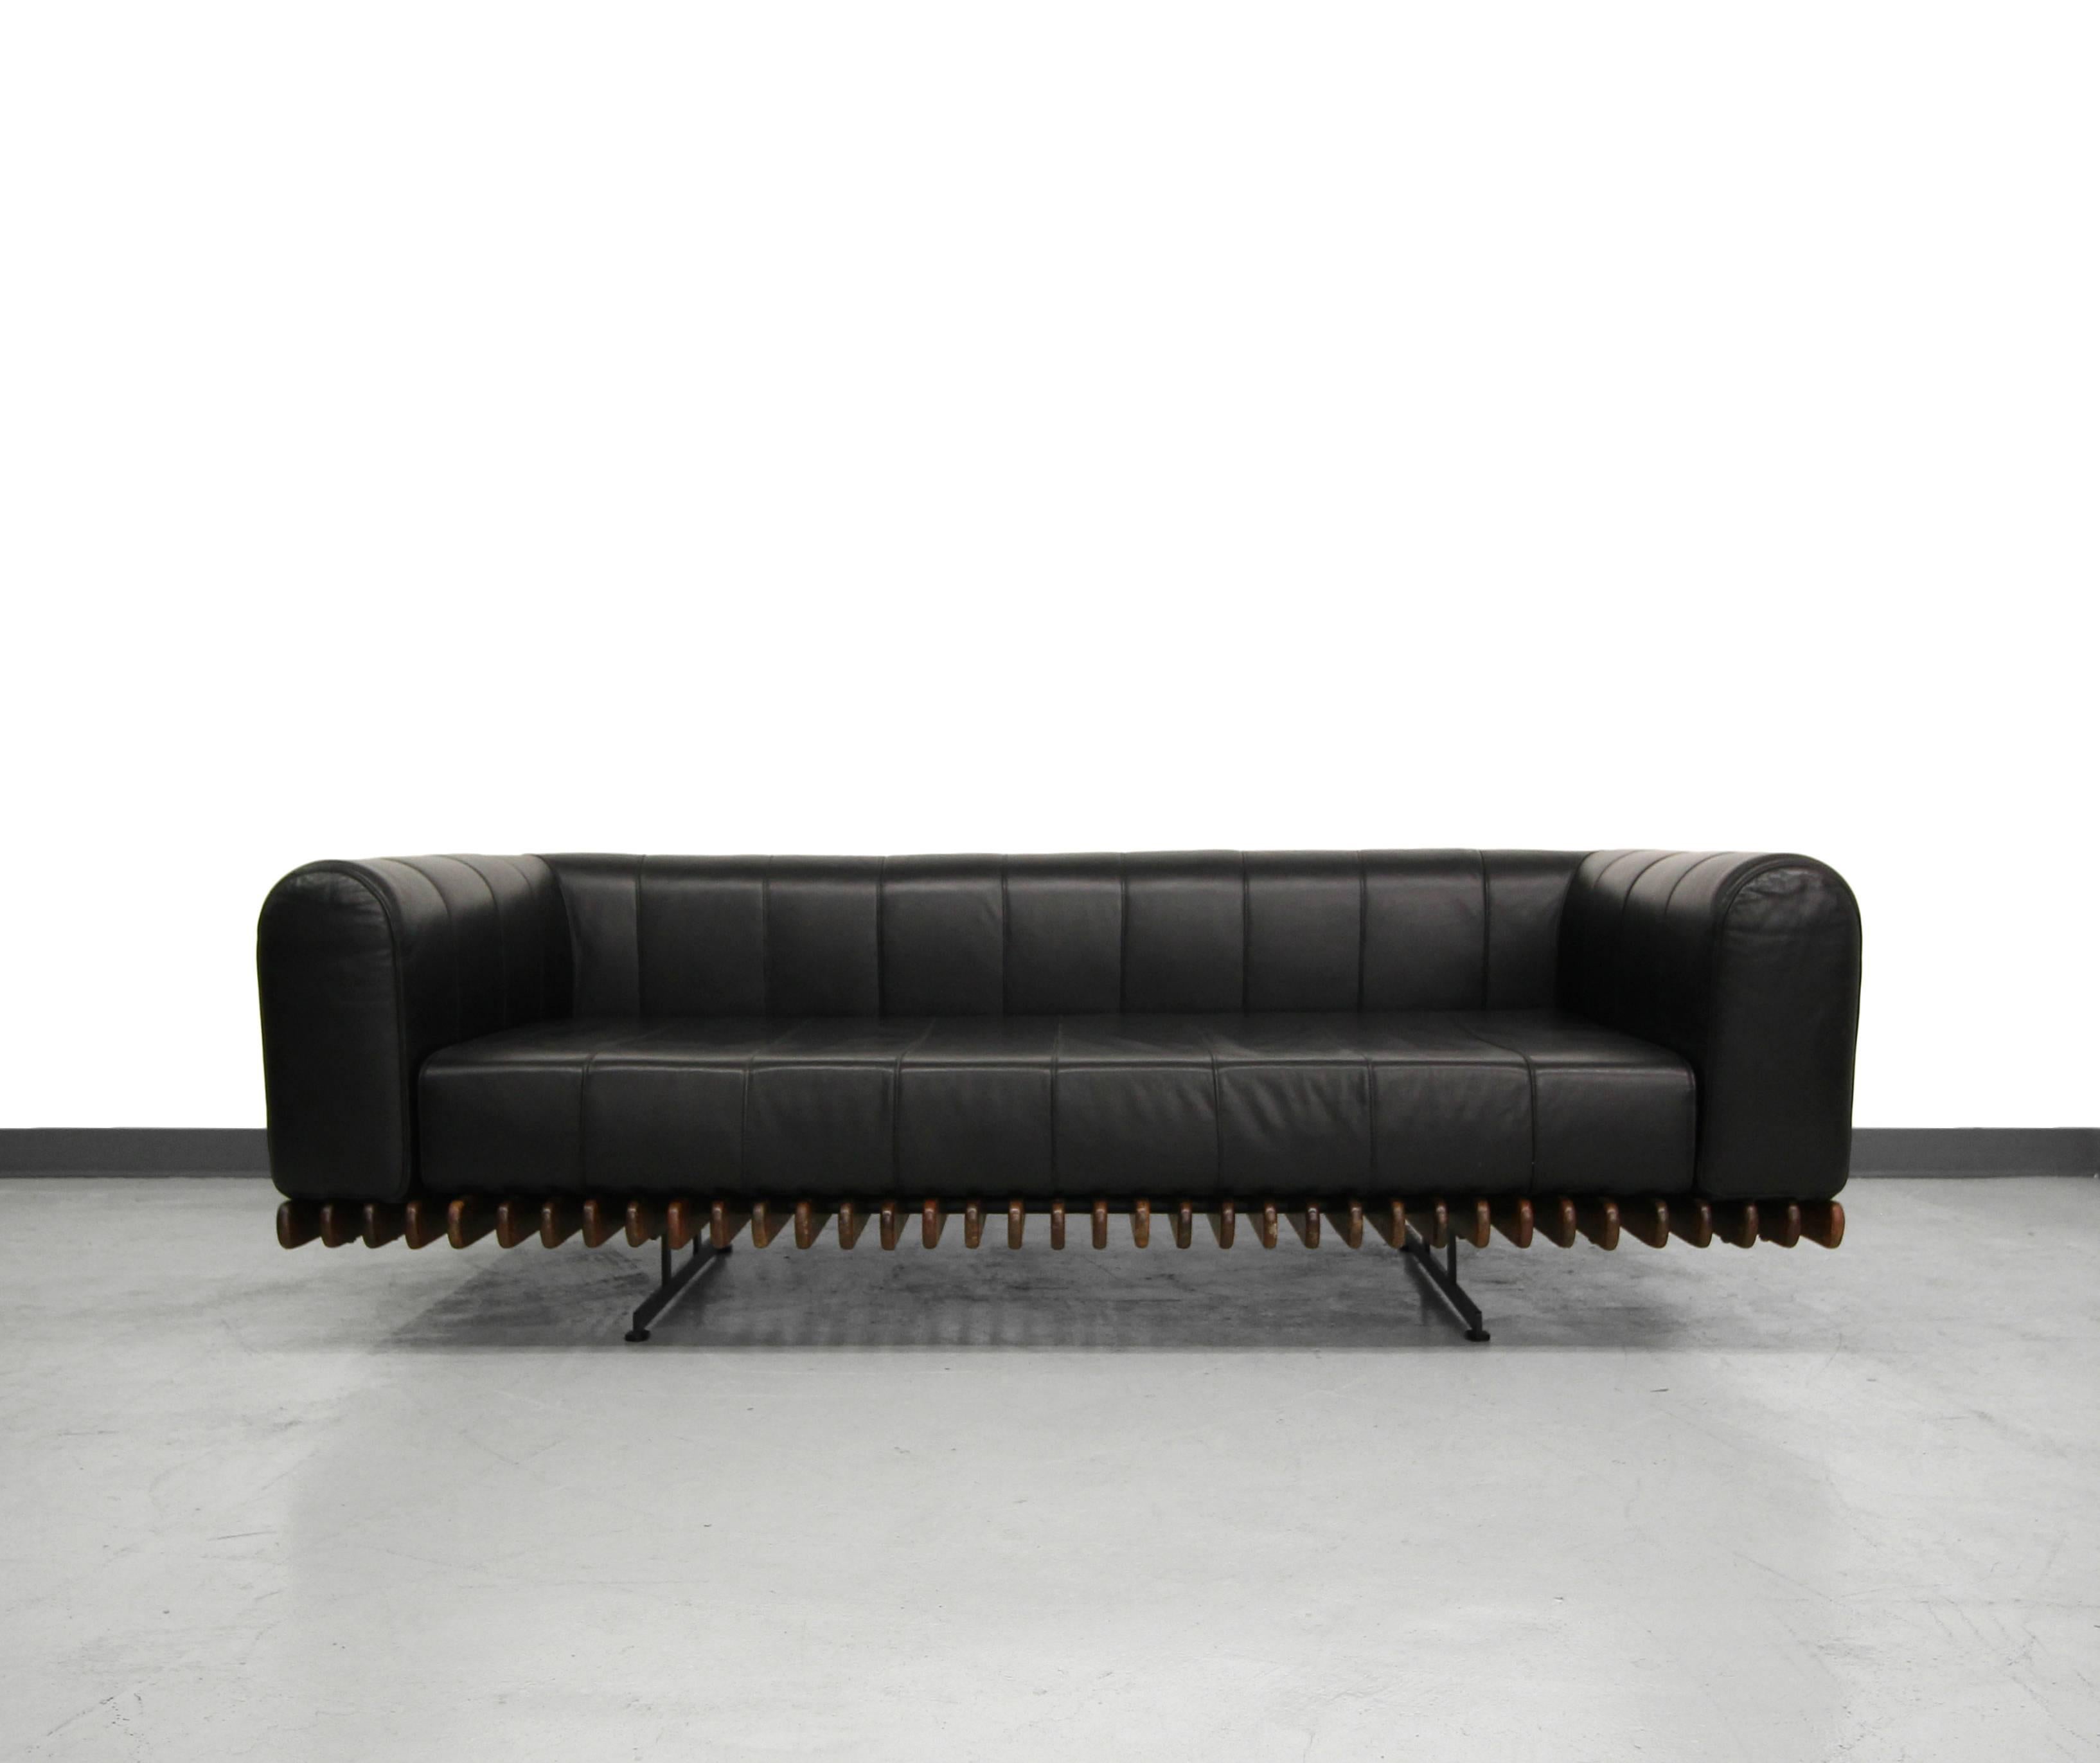 Pacific Green's low profile channeled leather sofa. Constructed out of beautiful palmwood and beautiful, butter soft A-grade, leather floating on a steel frame. Gorgeous piece exhibiting both form and function.

Pacific Green is a sustainable